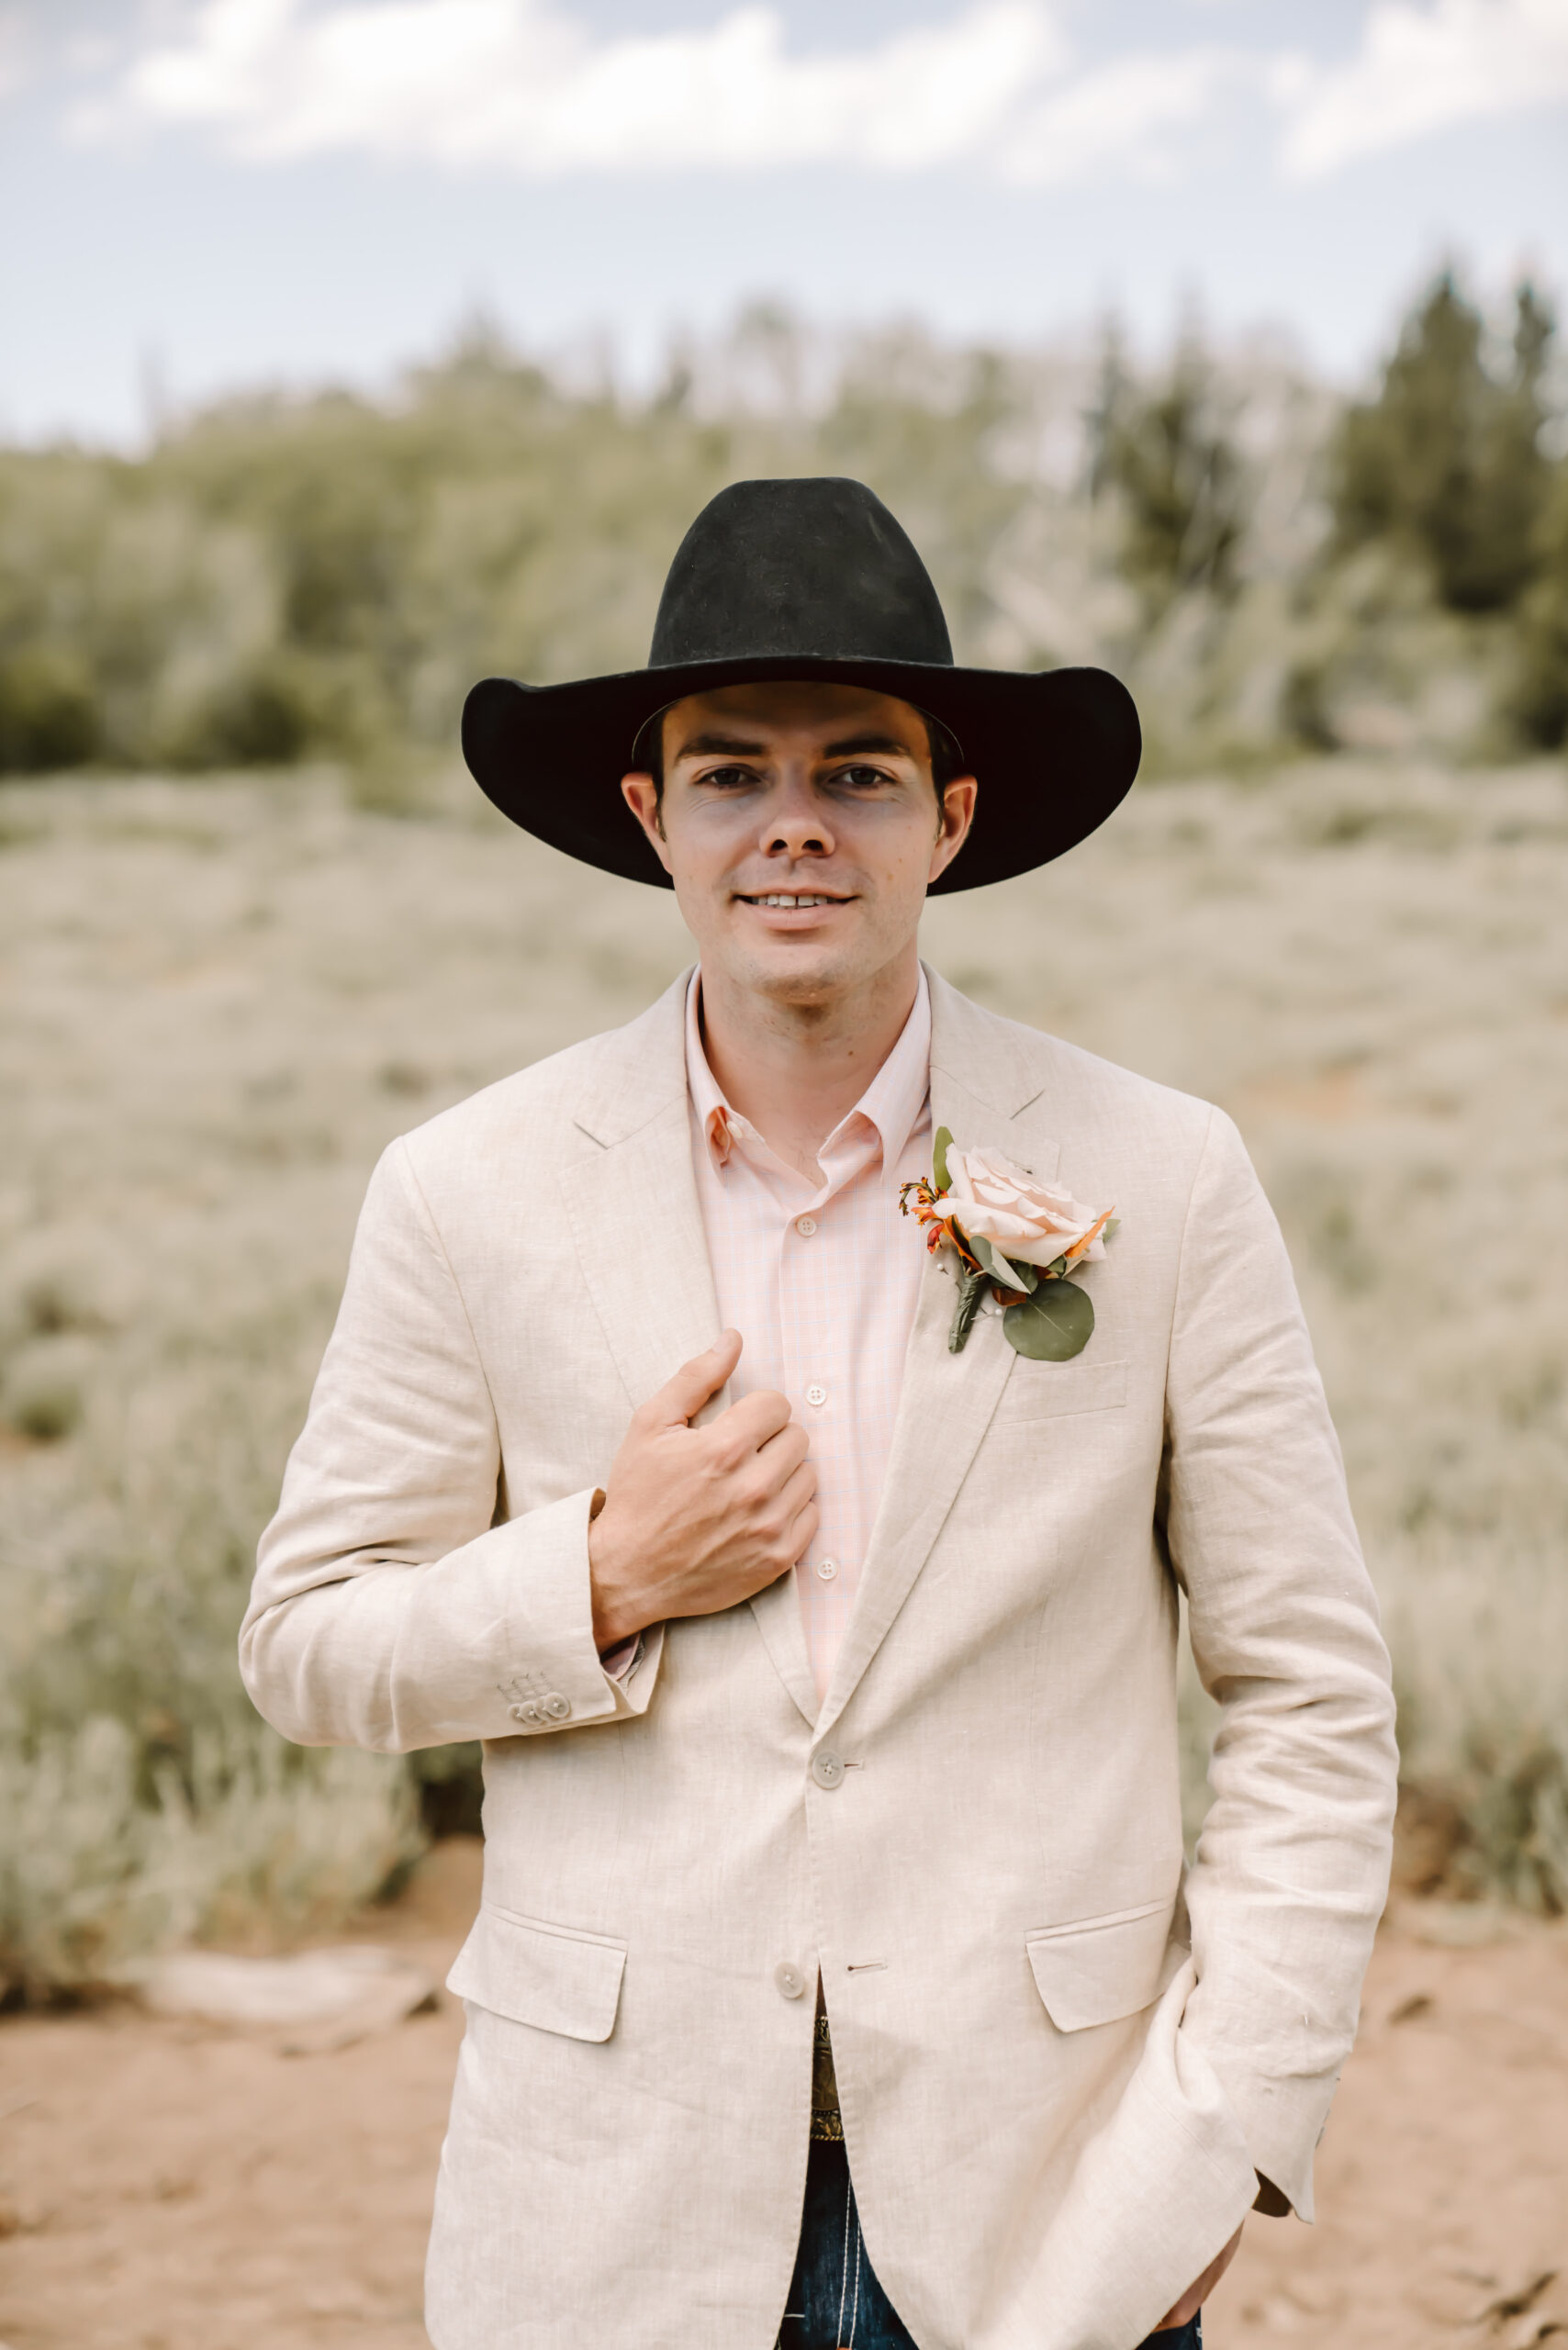 A groom wearing a white suit jacket and cowboy hat for his western themed elopement